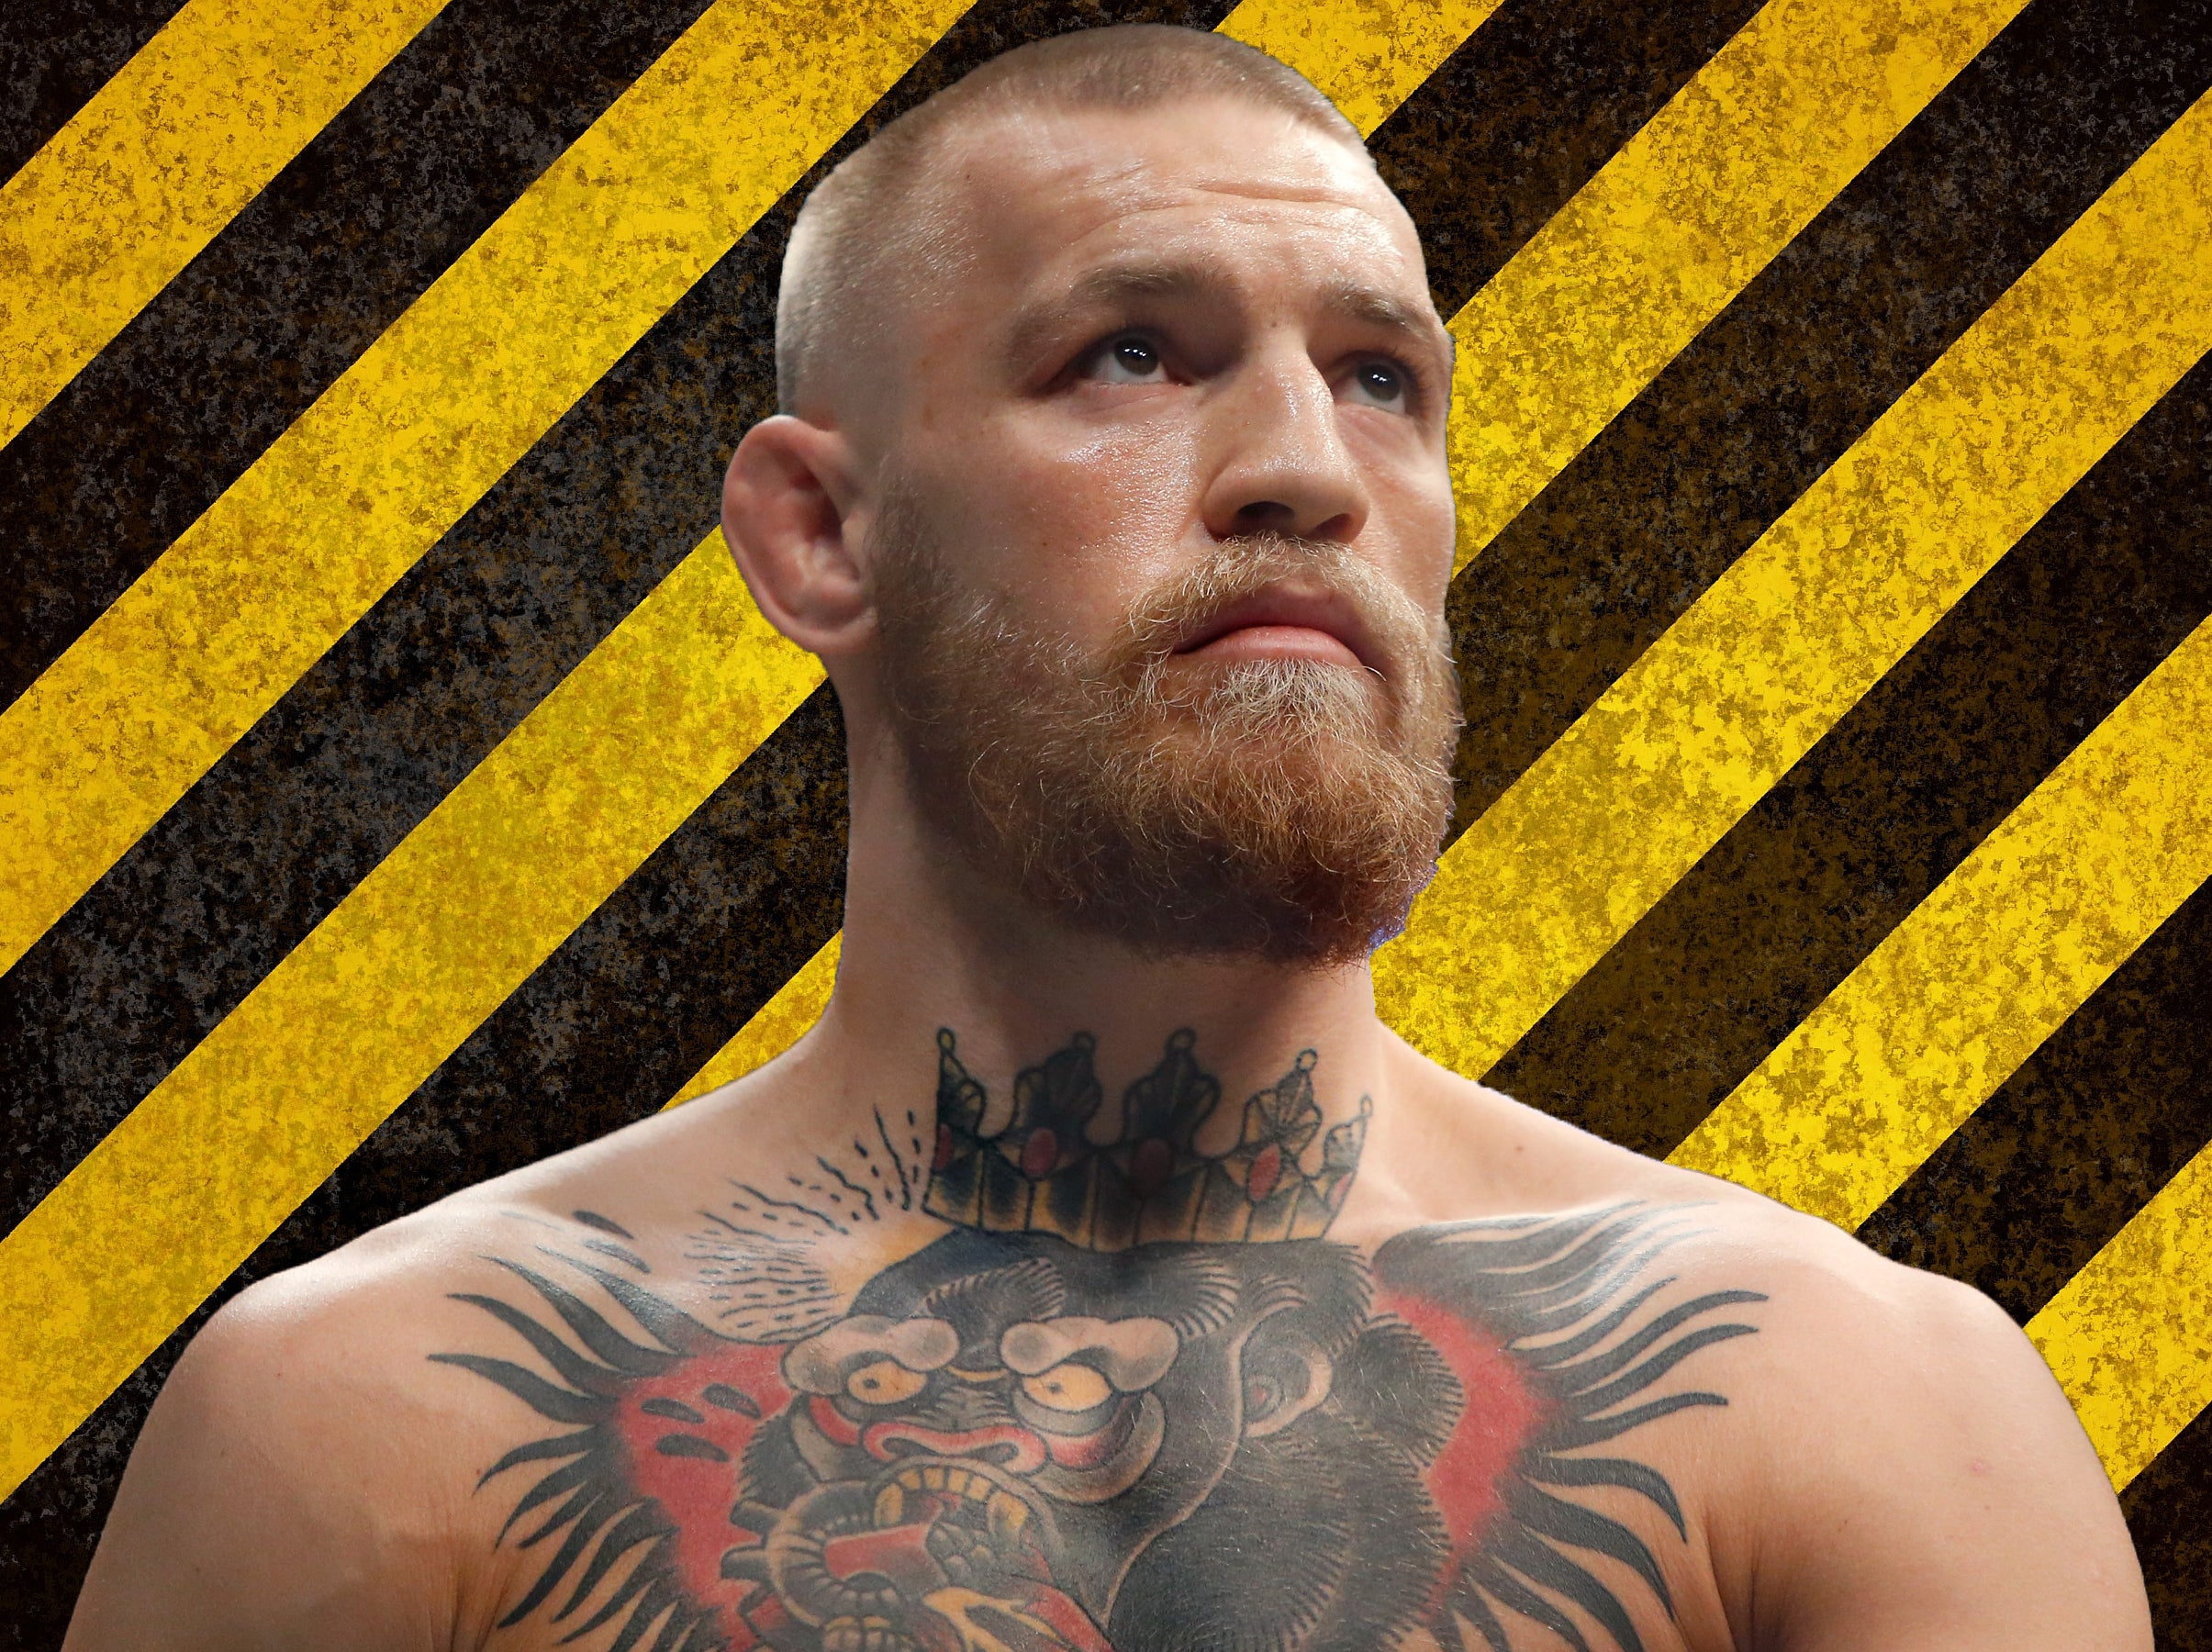 McGregor makes his professional boxing debut on August 26